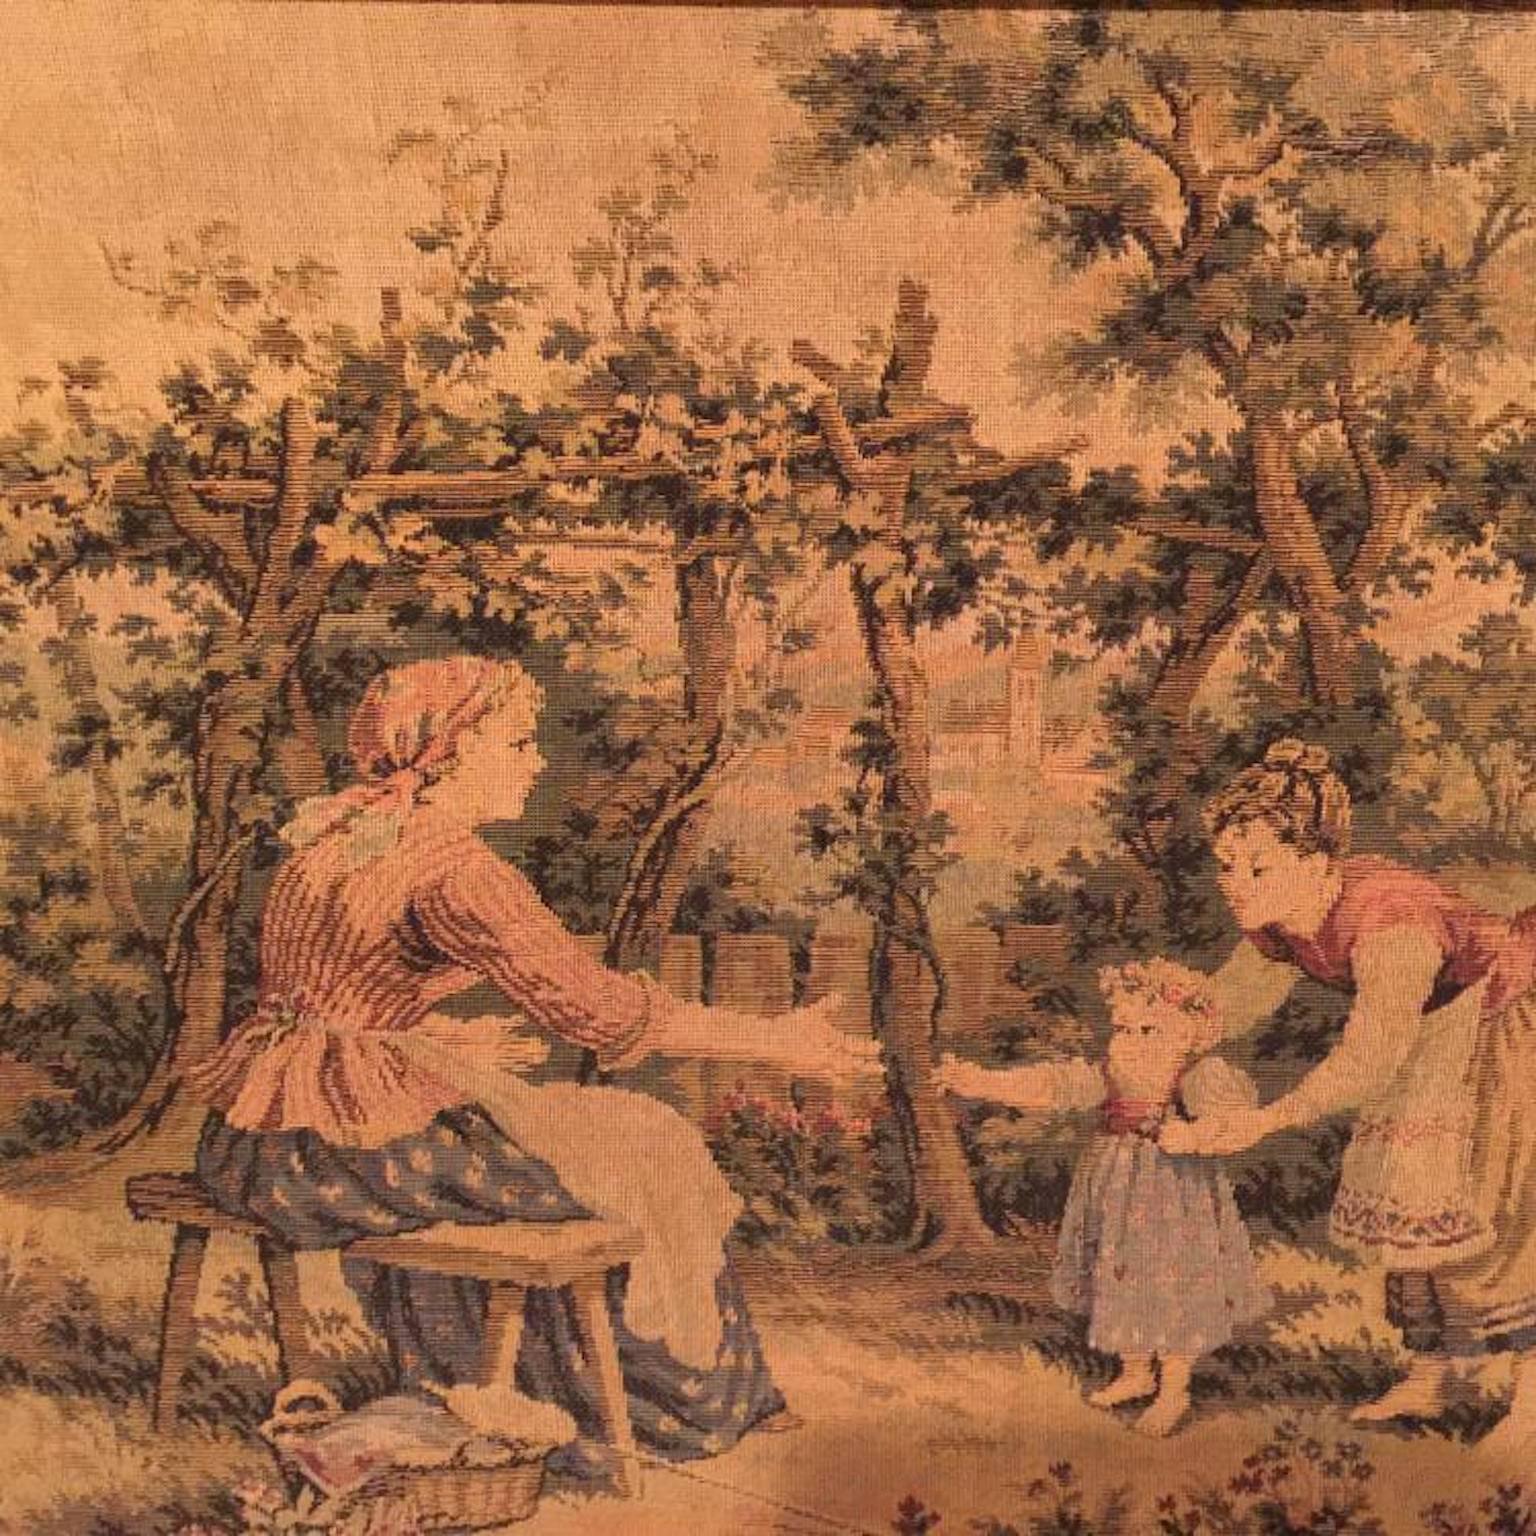 French antique framed tapestry 19th century.